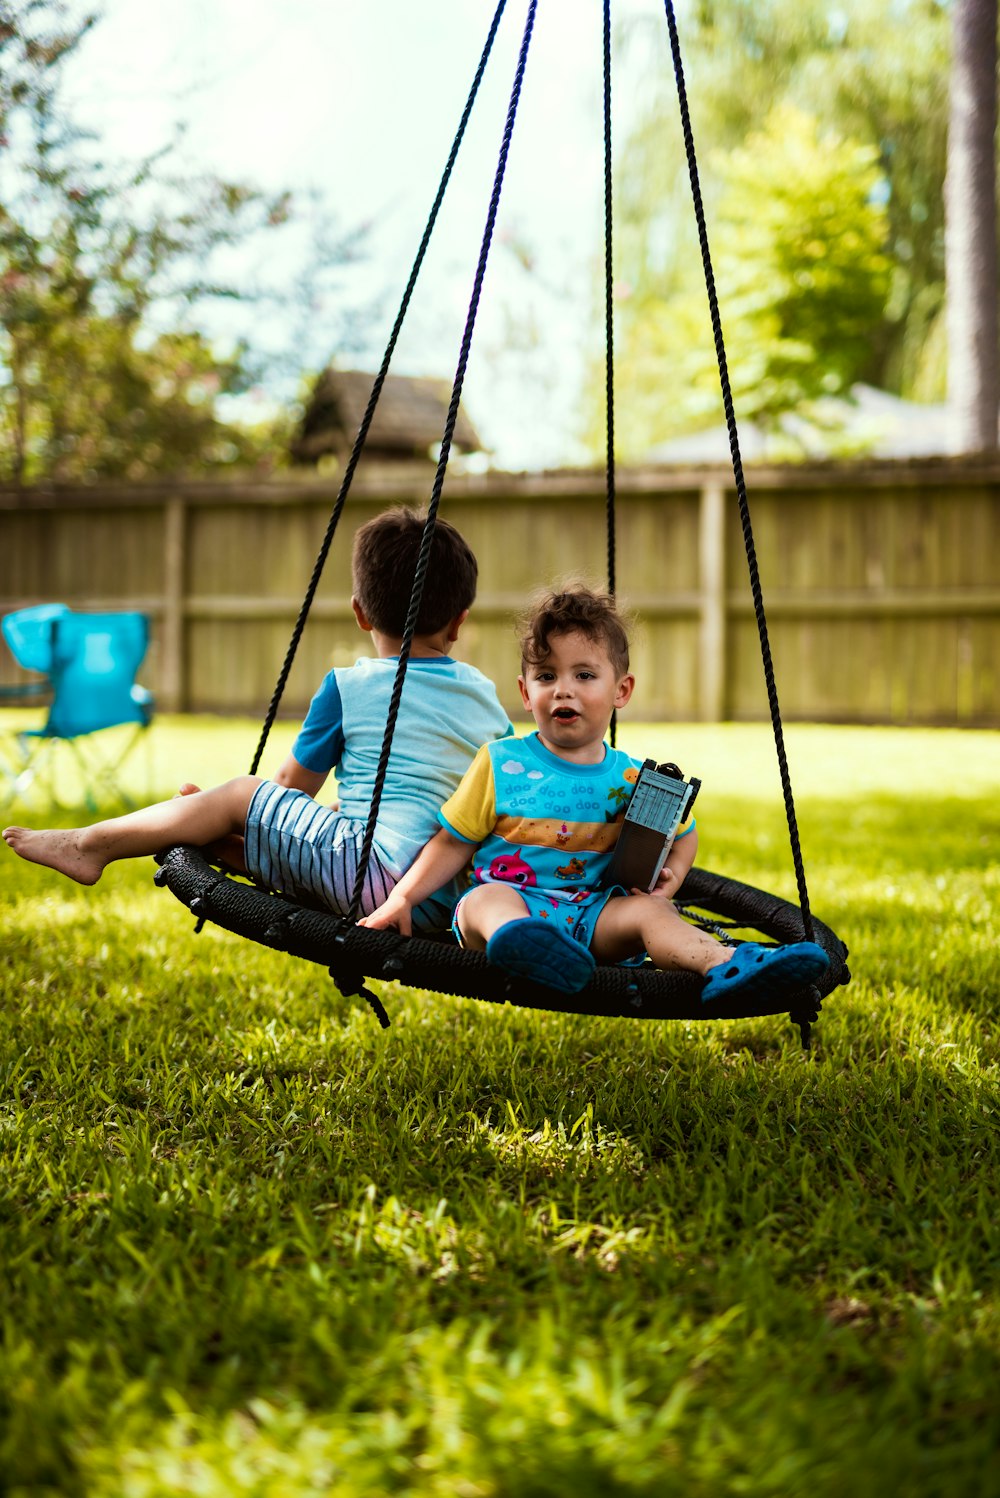 boy in blue and white stripe shirt sitting on swing during daytime